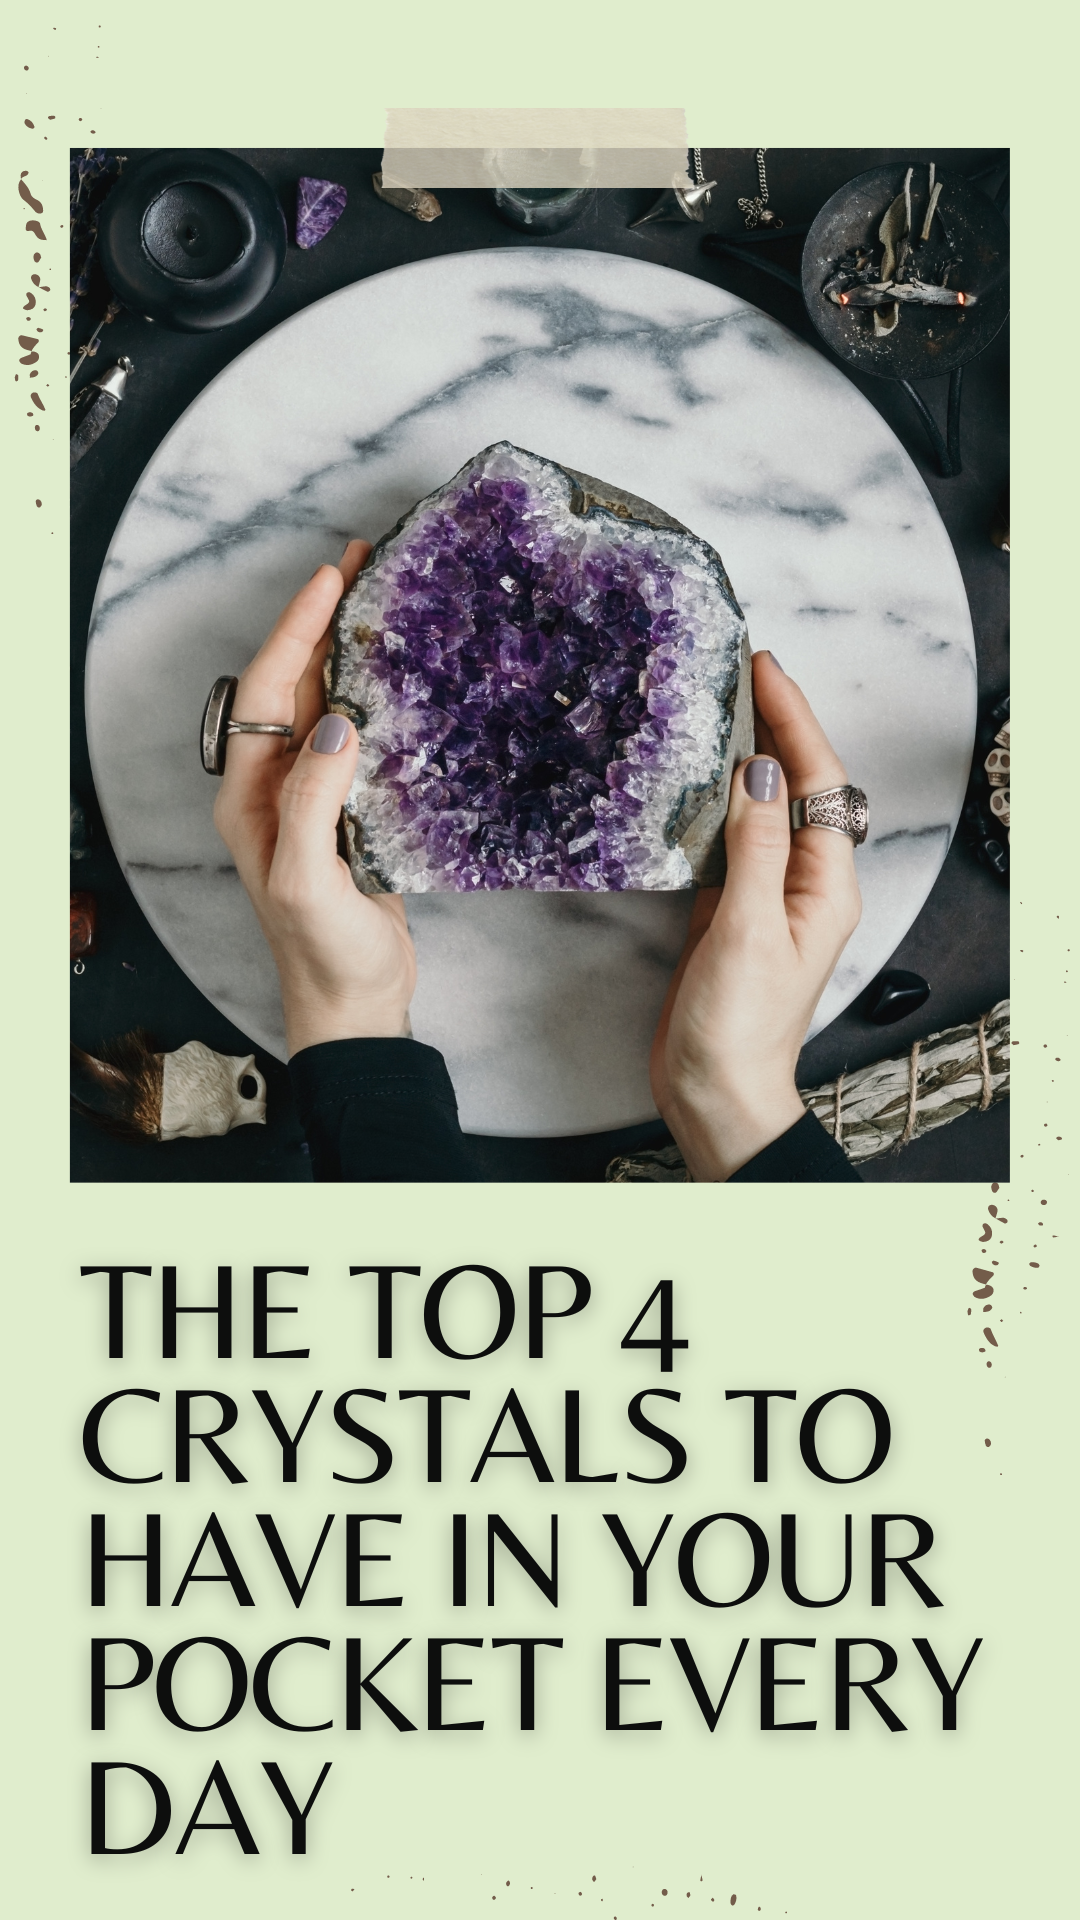 The Top 4 Crystals To Have In Your Pocket Every Day,